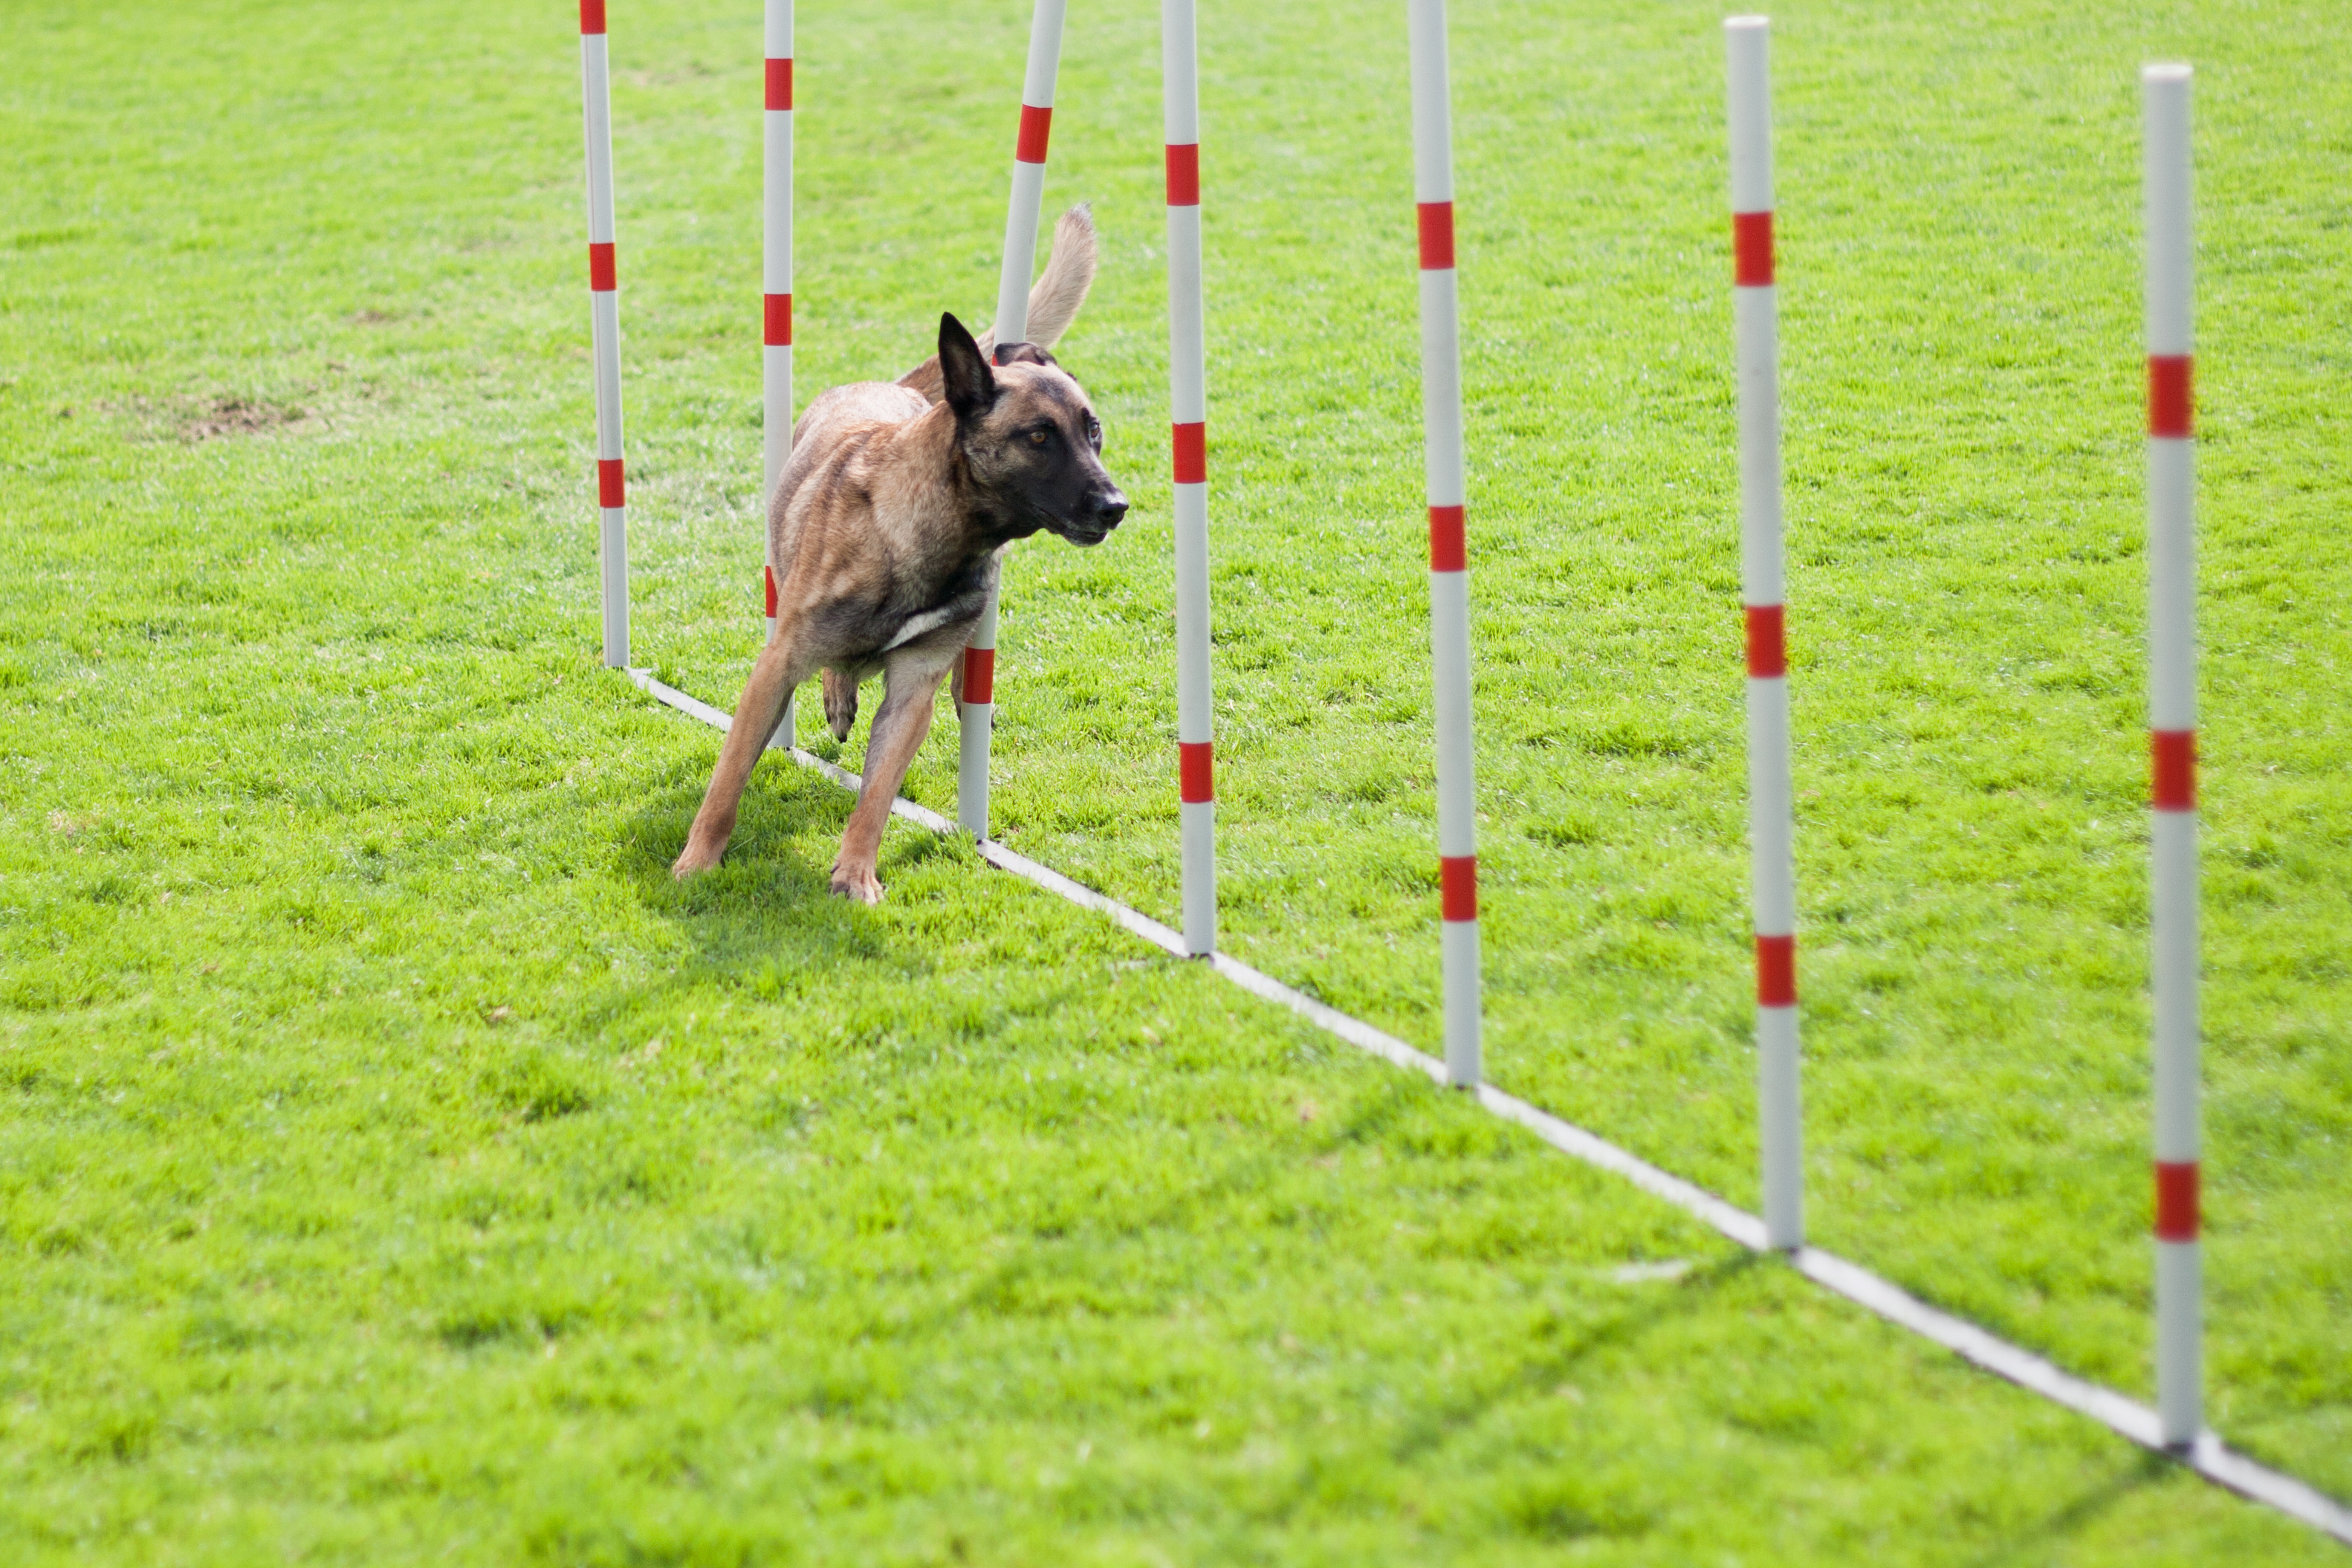 Dog Sports: Bh Examination, Judicial Expert in Canine Training and Behavior. 3170x2110 HD Background.